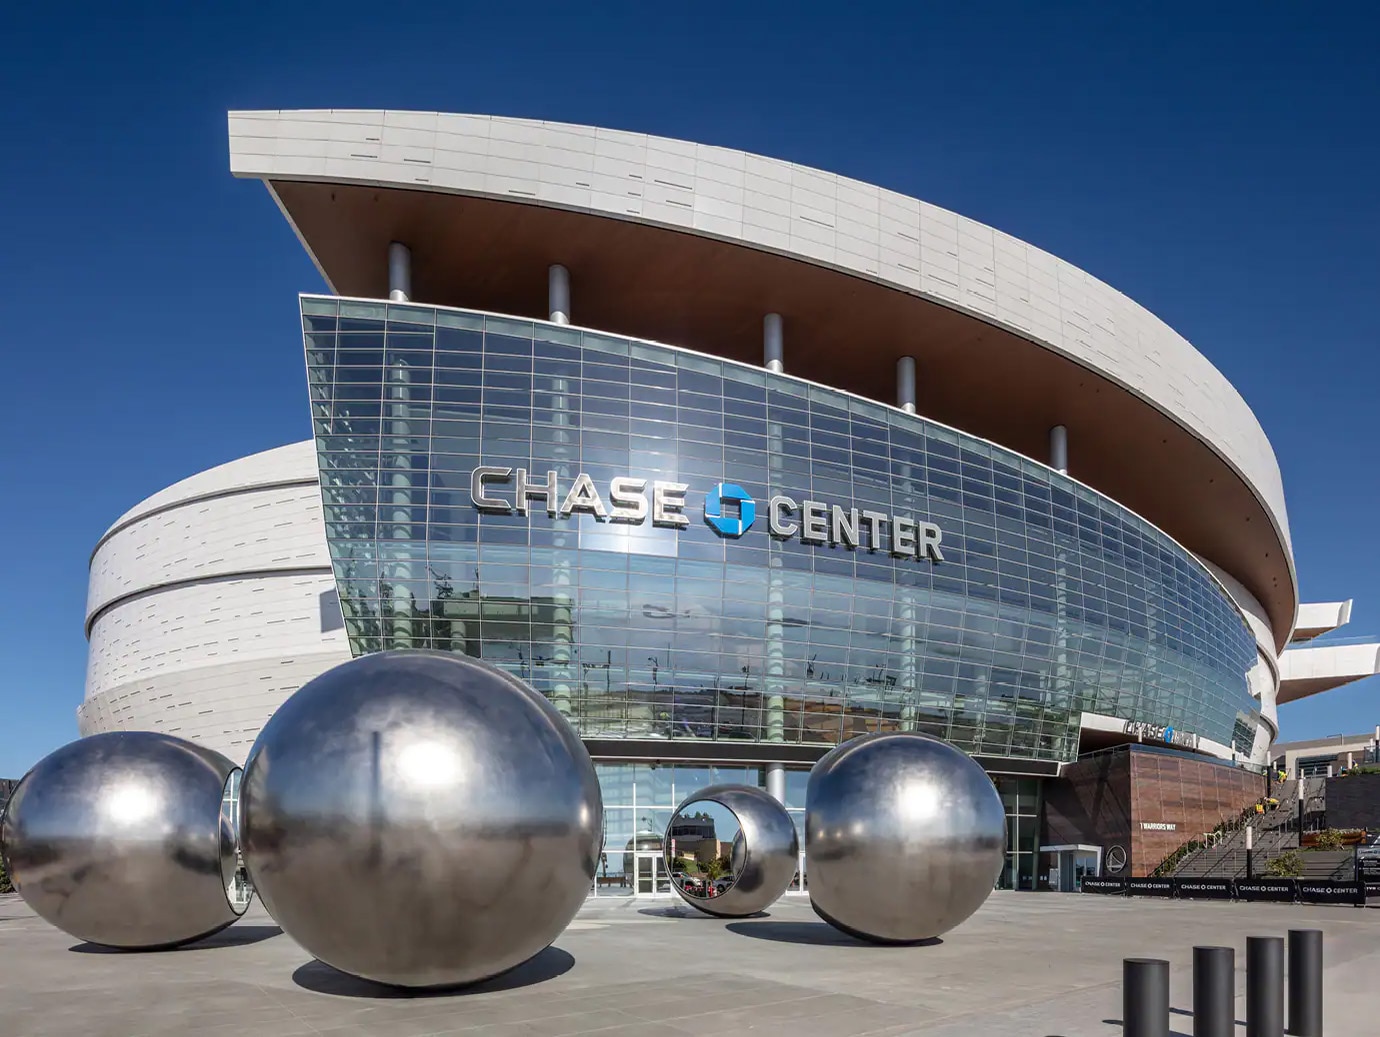 Chase Center in San Francisco, USA